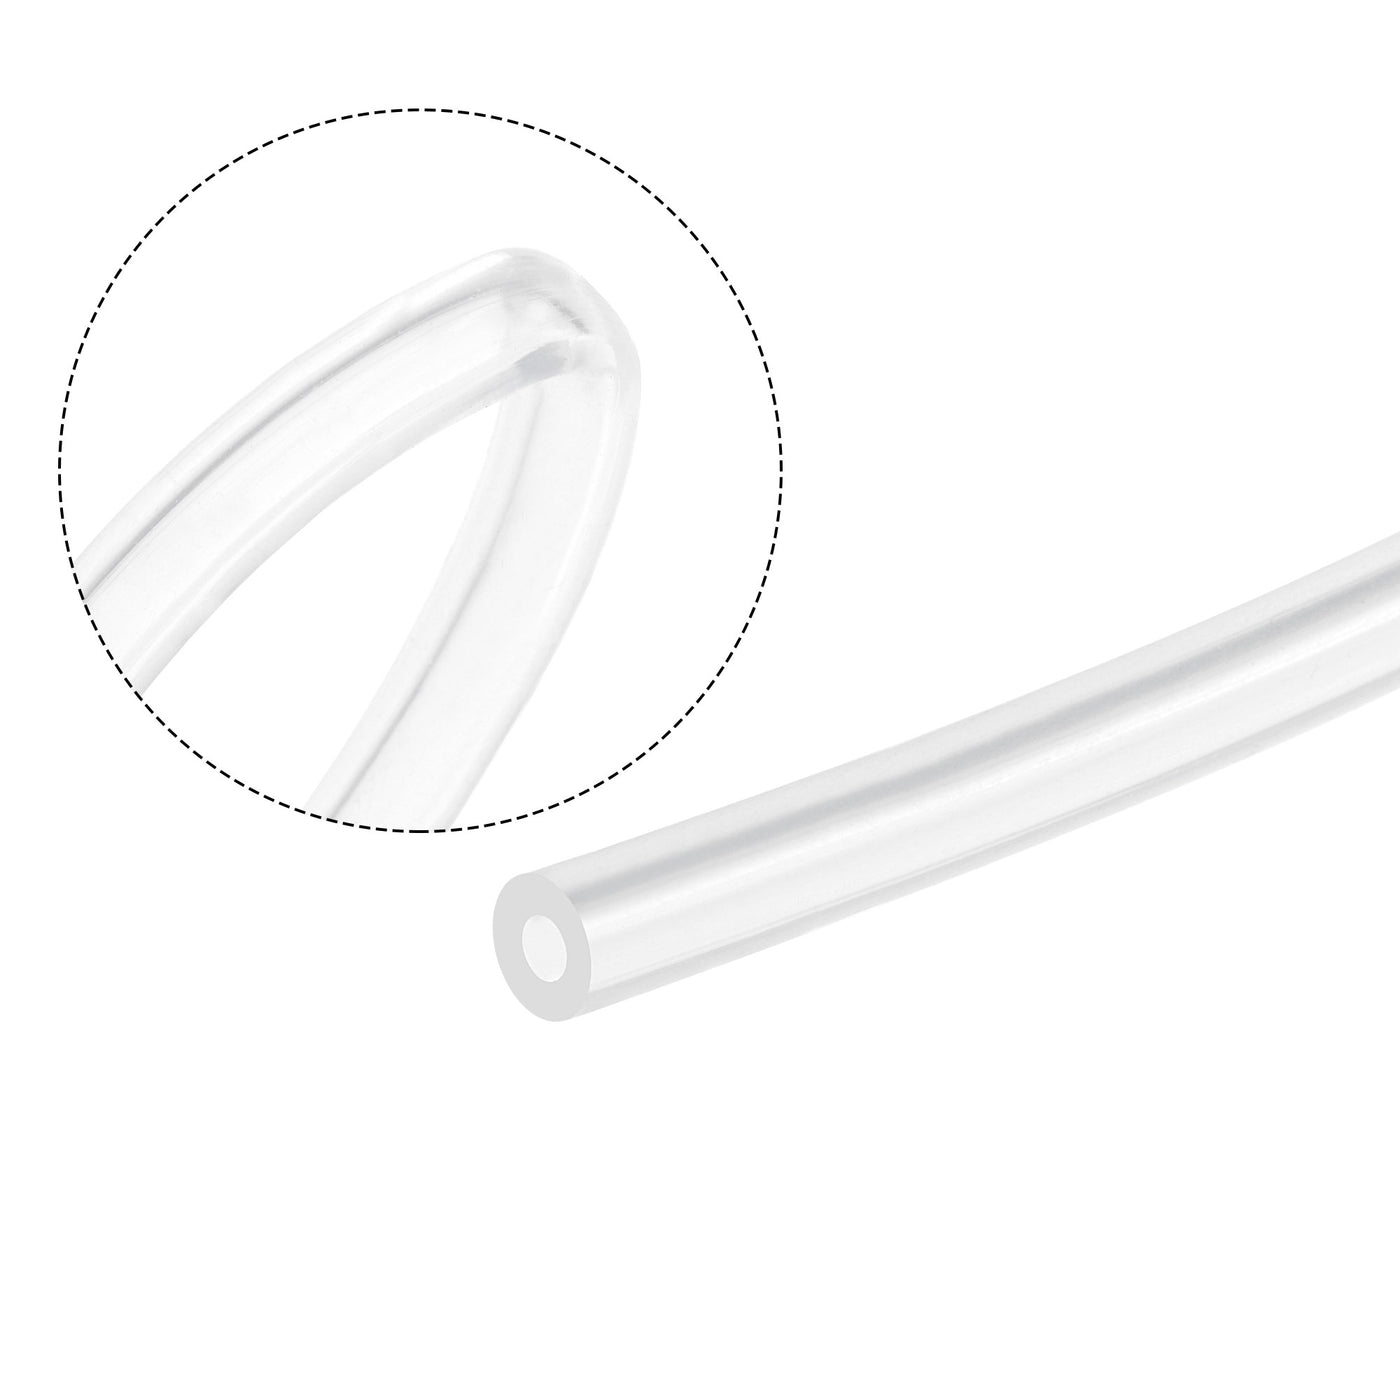 Uxcell Uxcell Clear Silicone Tubing, 1/8"(3.2mm) ID 1/4"(6.4mm) OD 1/16" Wall 6.6ft, Flexible Silicone Tube for Air Water Pipe Pump Transfer